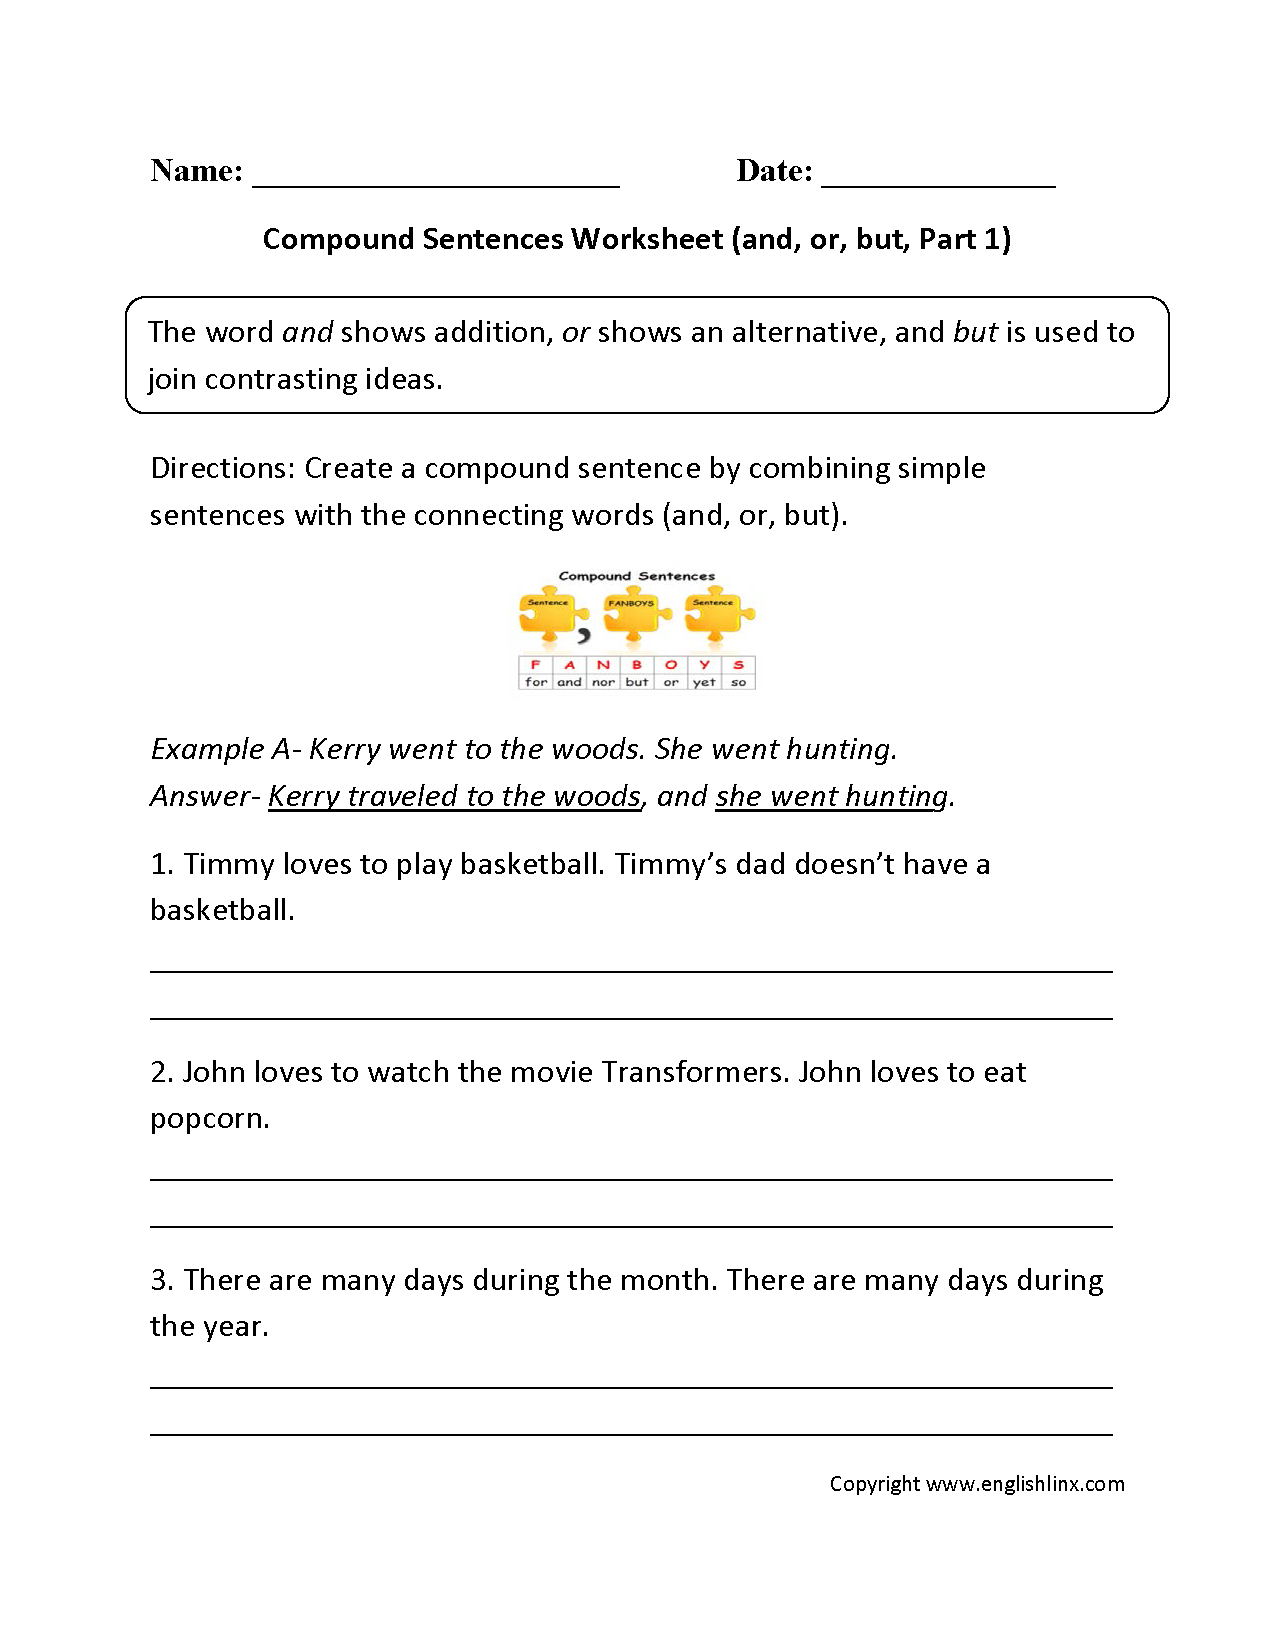 Compound Sentences Worksheets | Englishlinx Board | Pinterest - Free | Free Printable Worksheets On Simple Compound And Complex Sentences